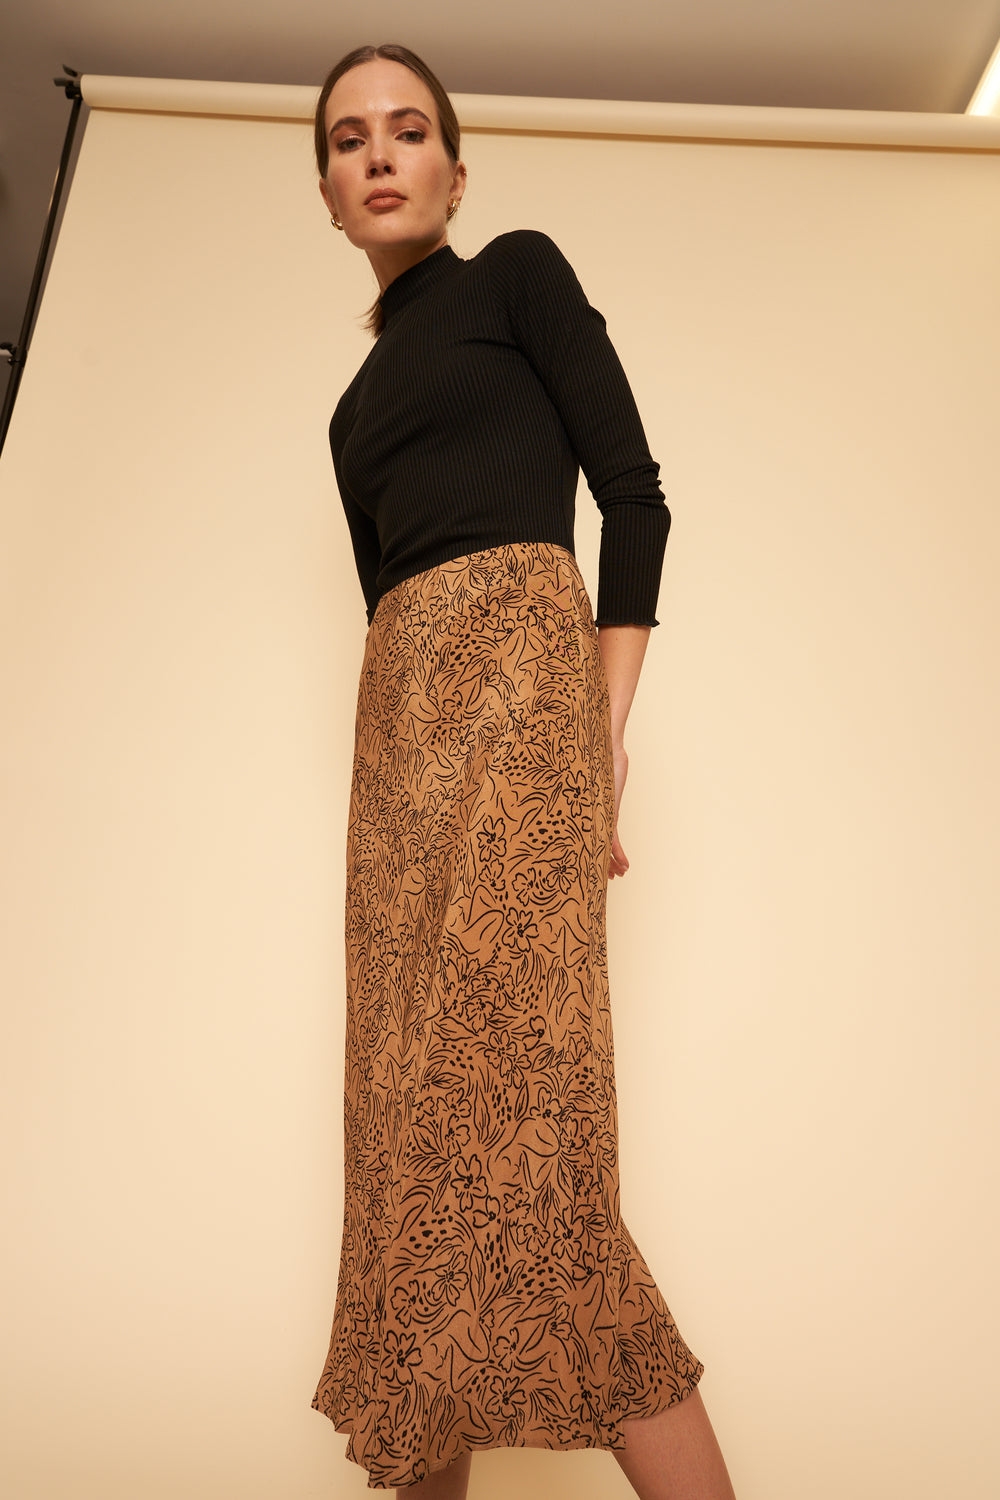 Donna Skirt in Lady Print - Whimsy & Row